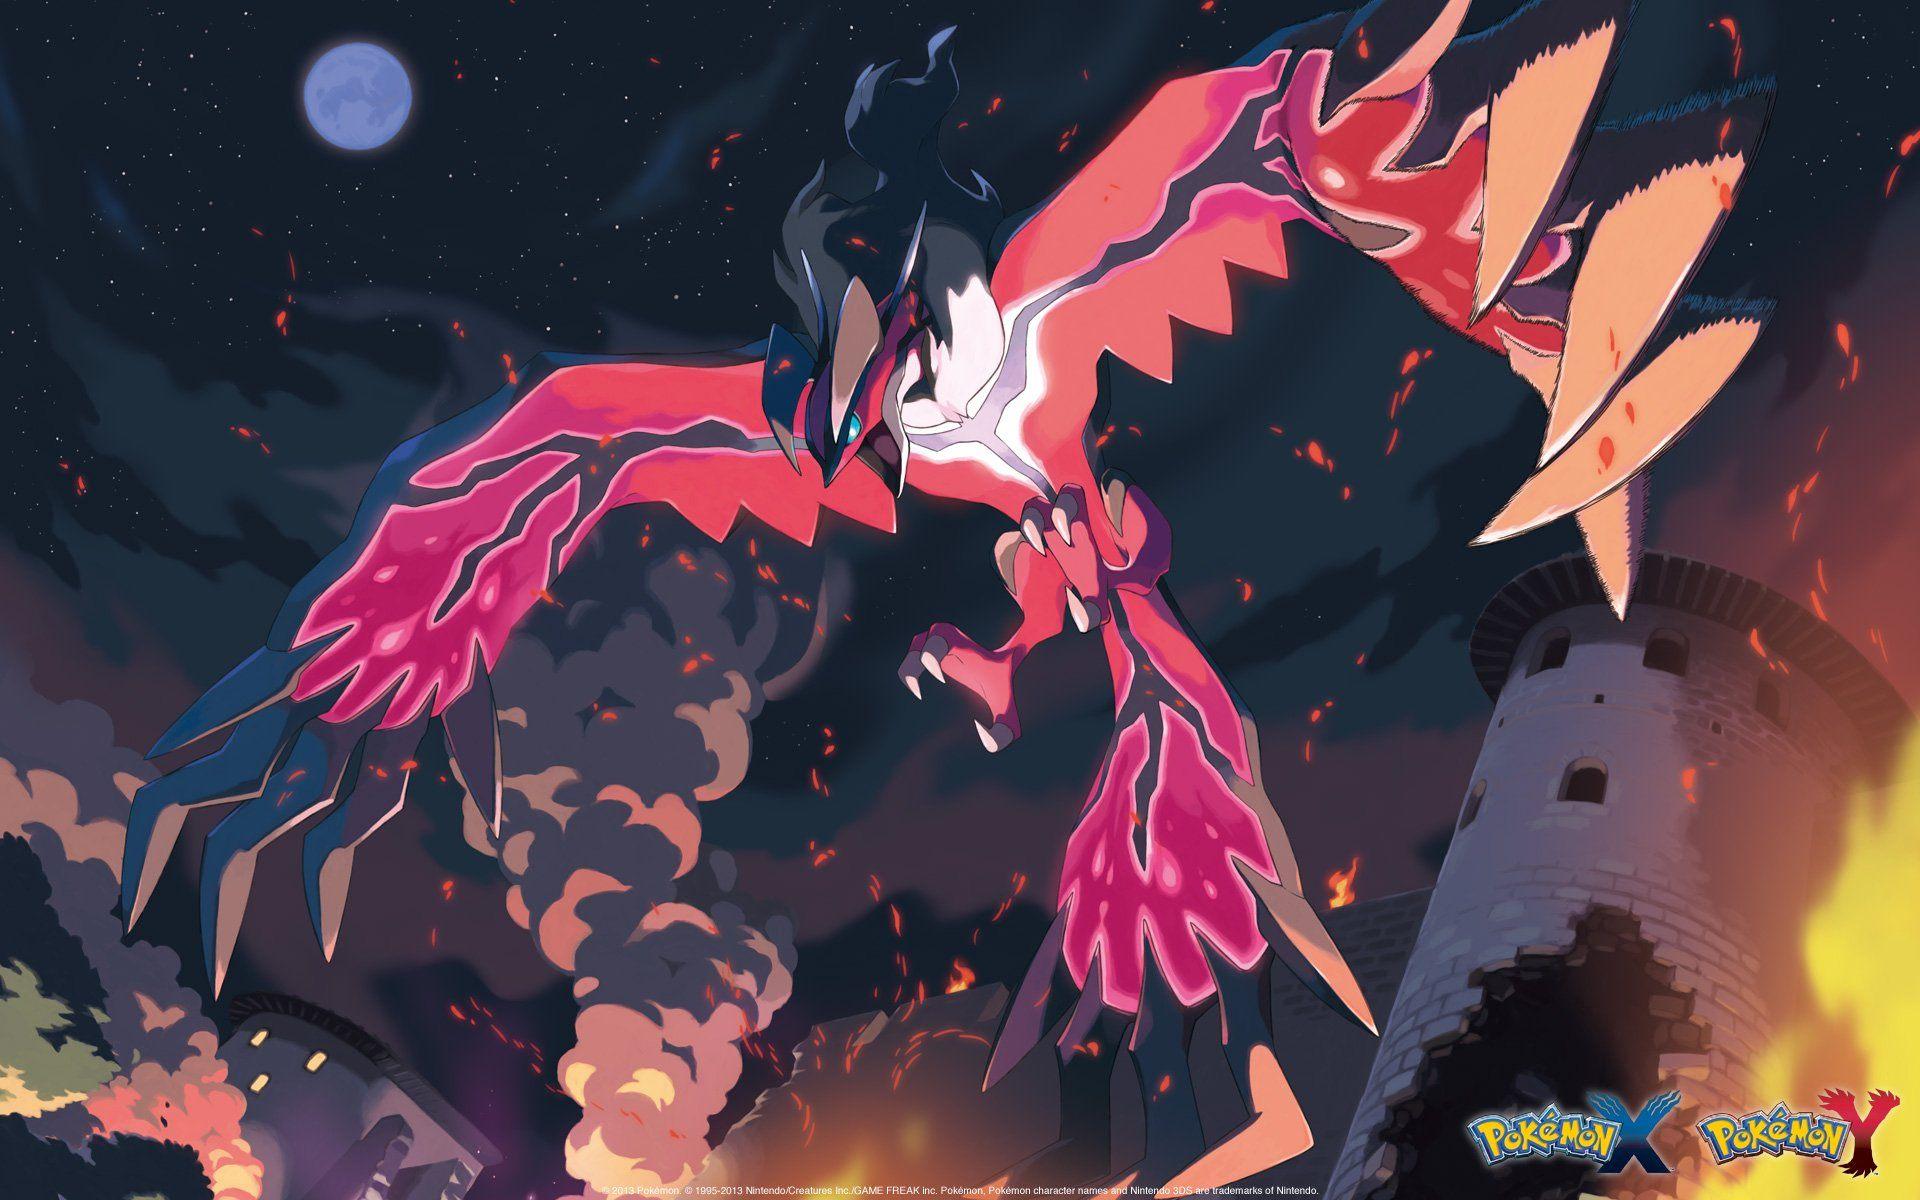 Pokemon: Why Yveltal is Poised to Succeed In VGC 2019's Moon Series